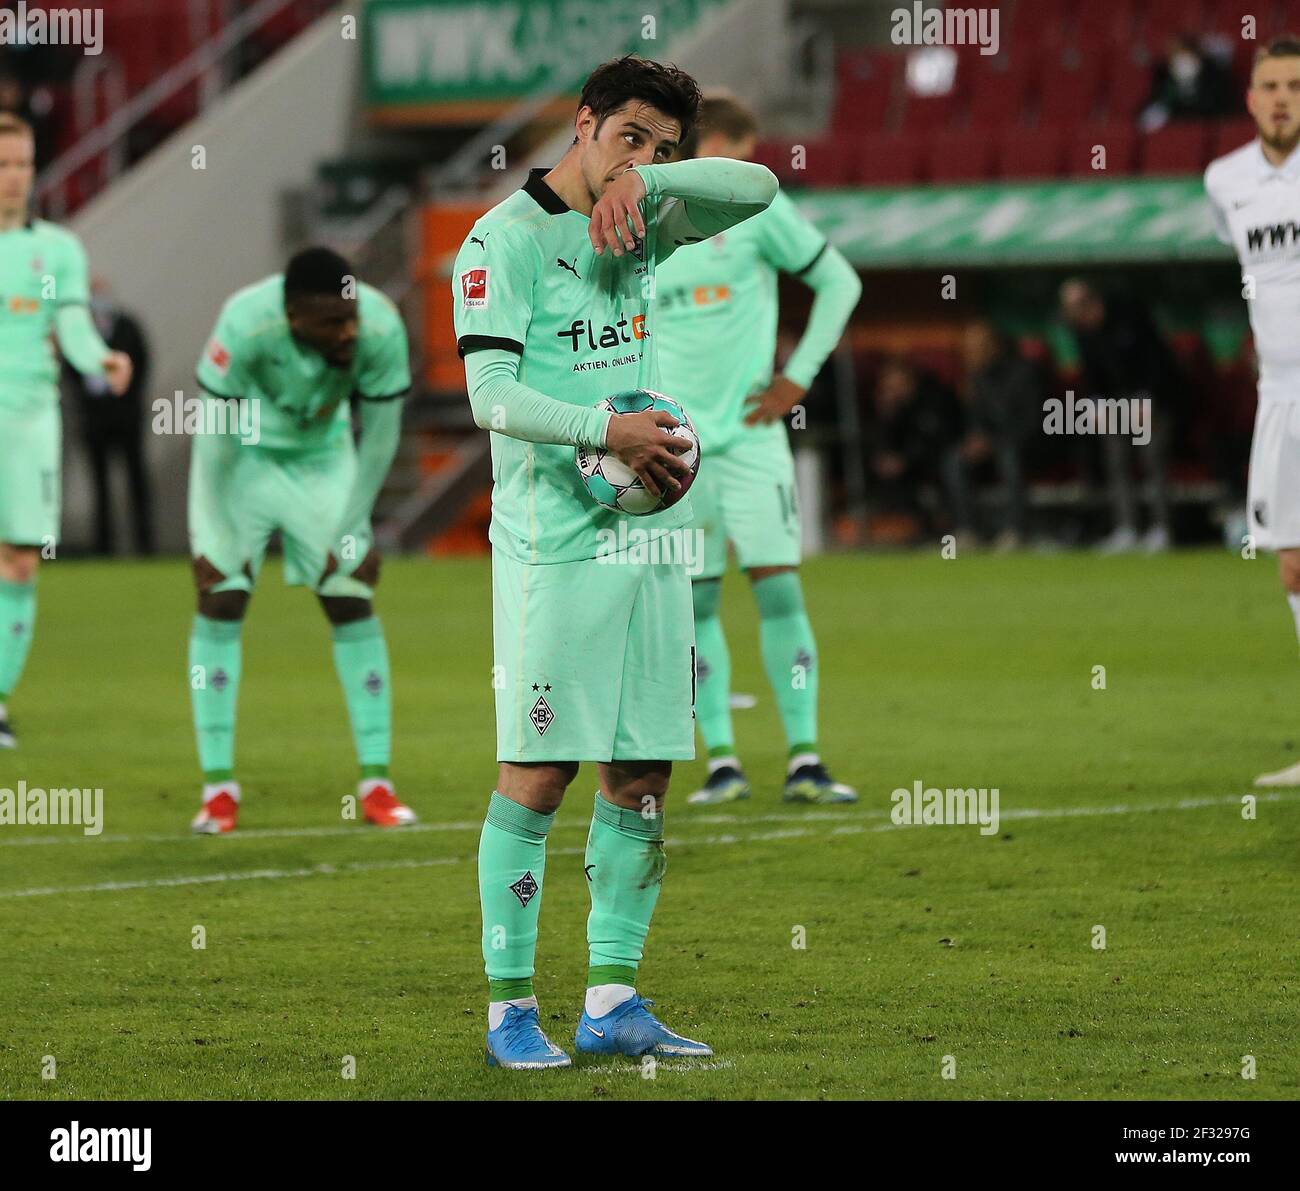 Lars STINDL (Borussia Monchengladbach) after a missed penalty kick, penalty  kick, disappointment, frustrated, disappointed, frustratedriert, dejected,  action, single action, single image, cut out, full body shot, whole figure.  Soccer 1st Bundesliga season